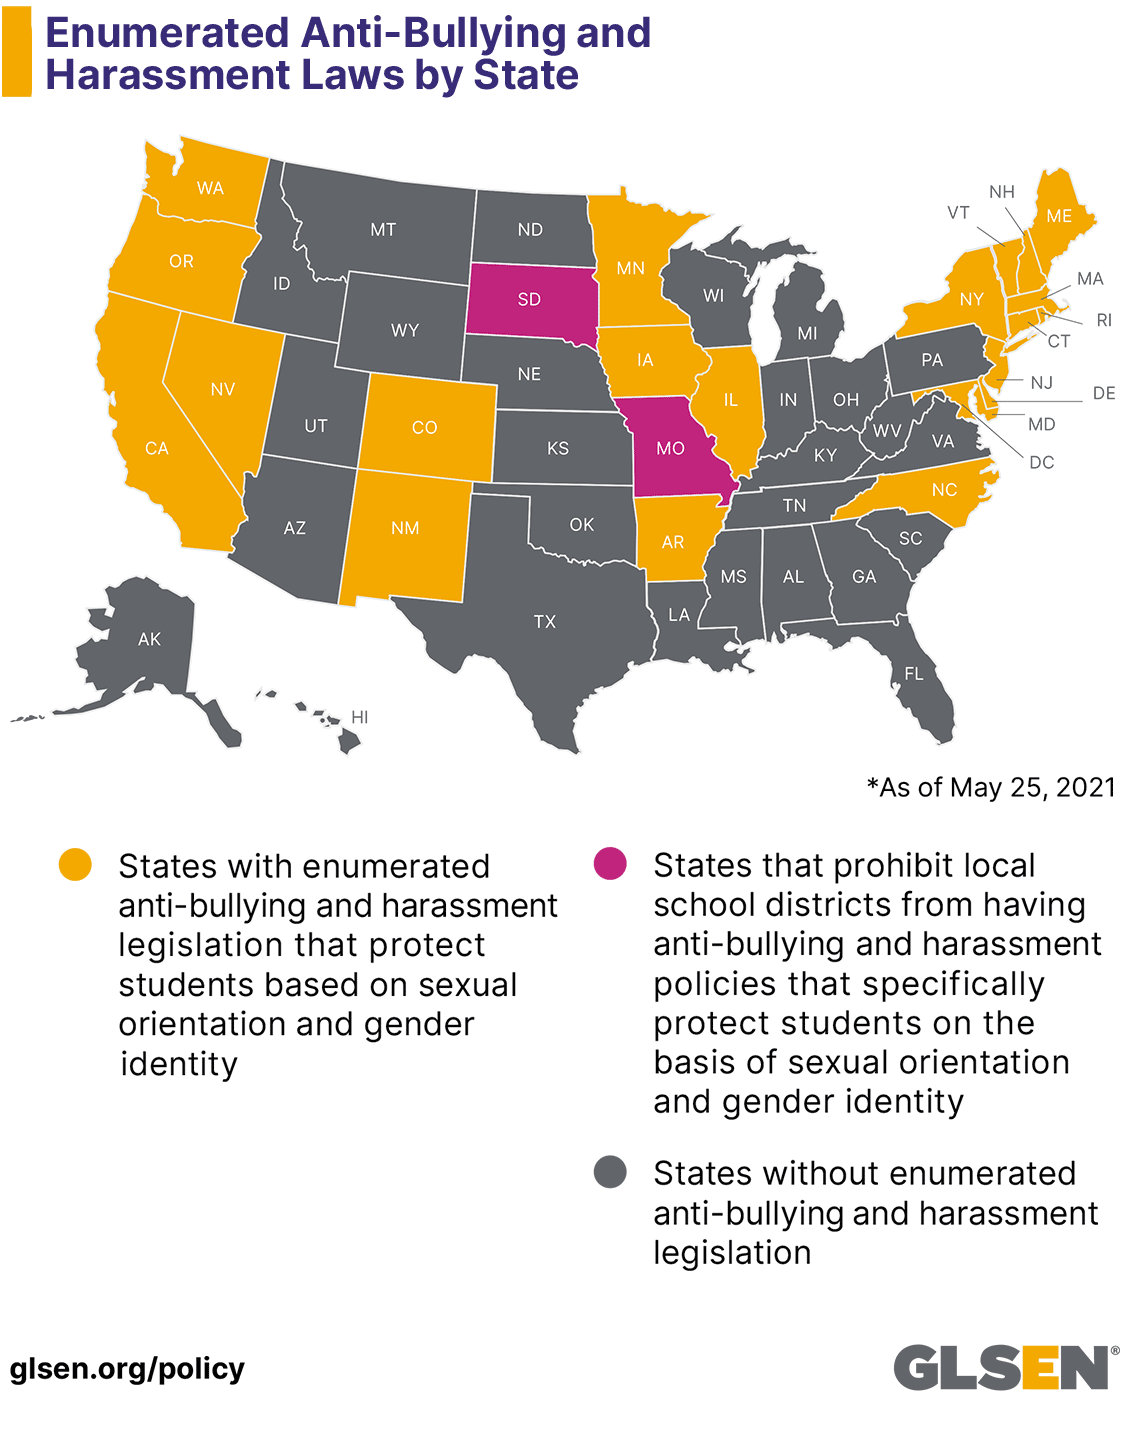 Enumerated Anti-Bullying Laws Protecting LGBTQ Students State by State